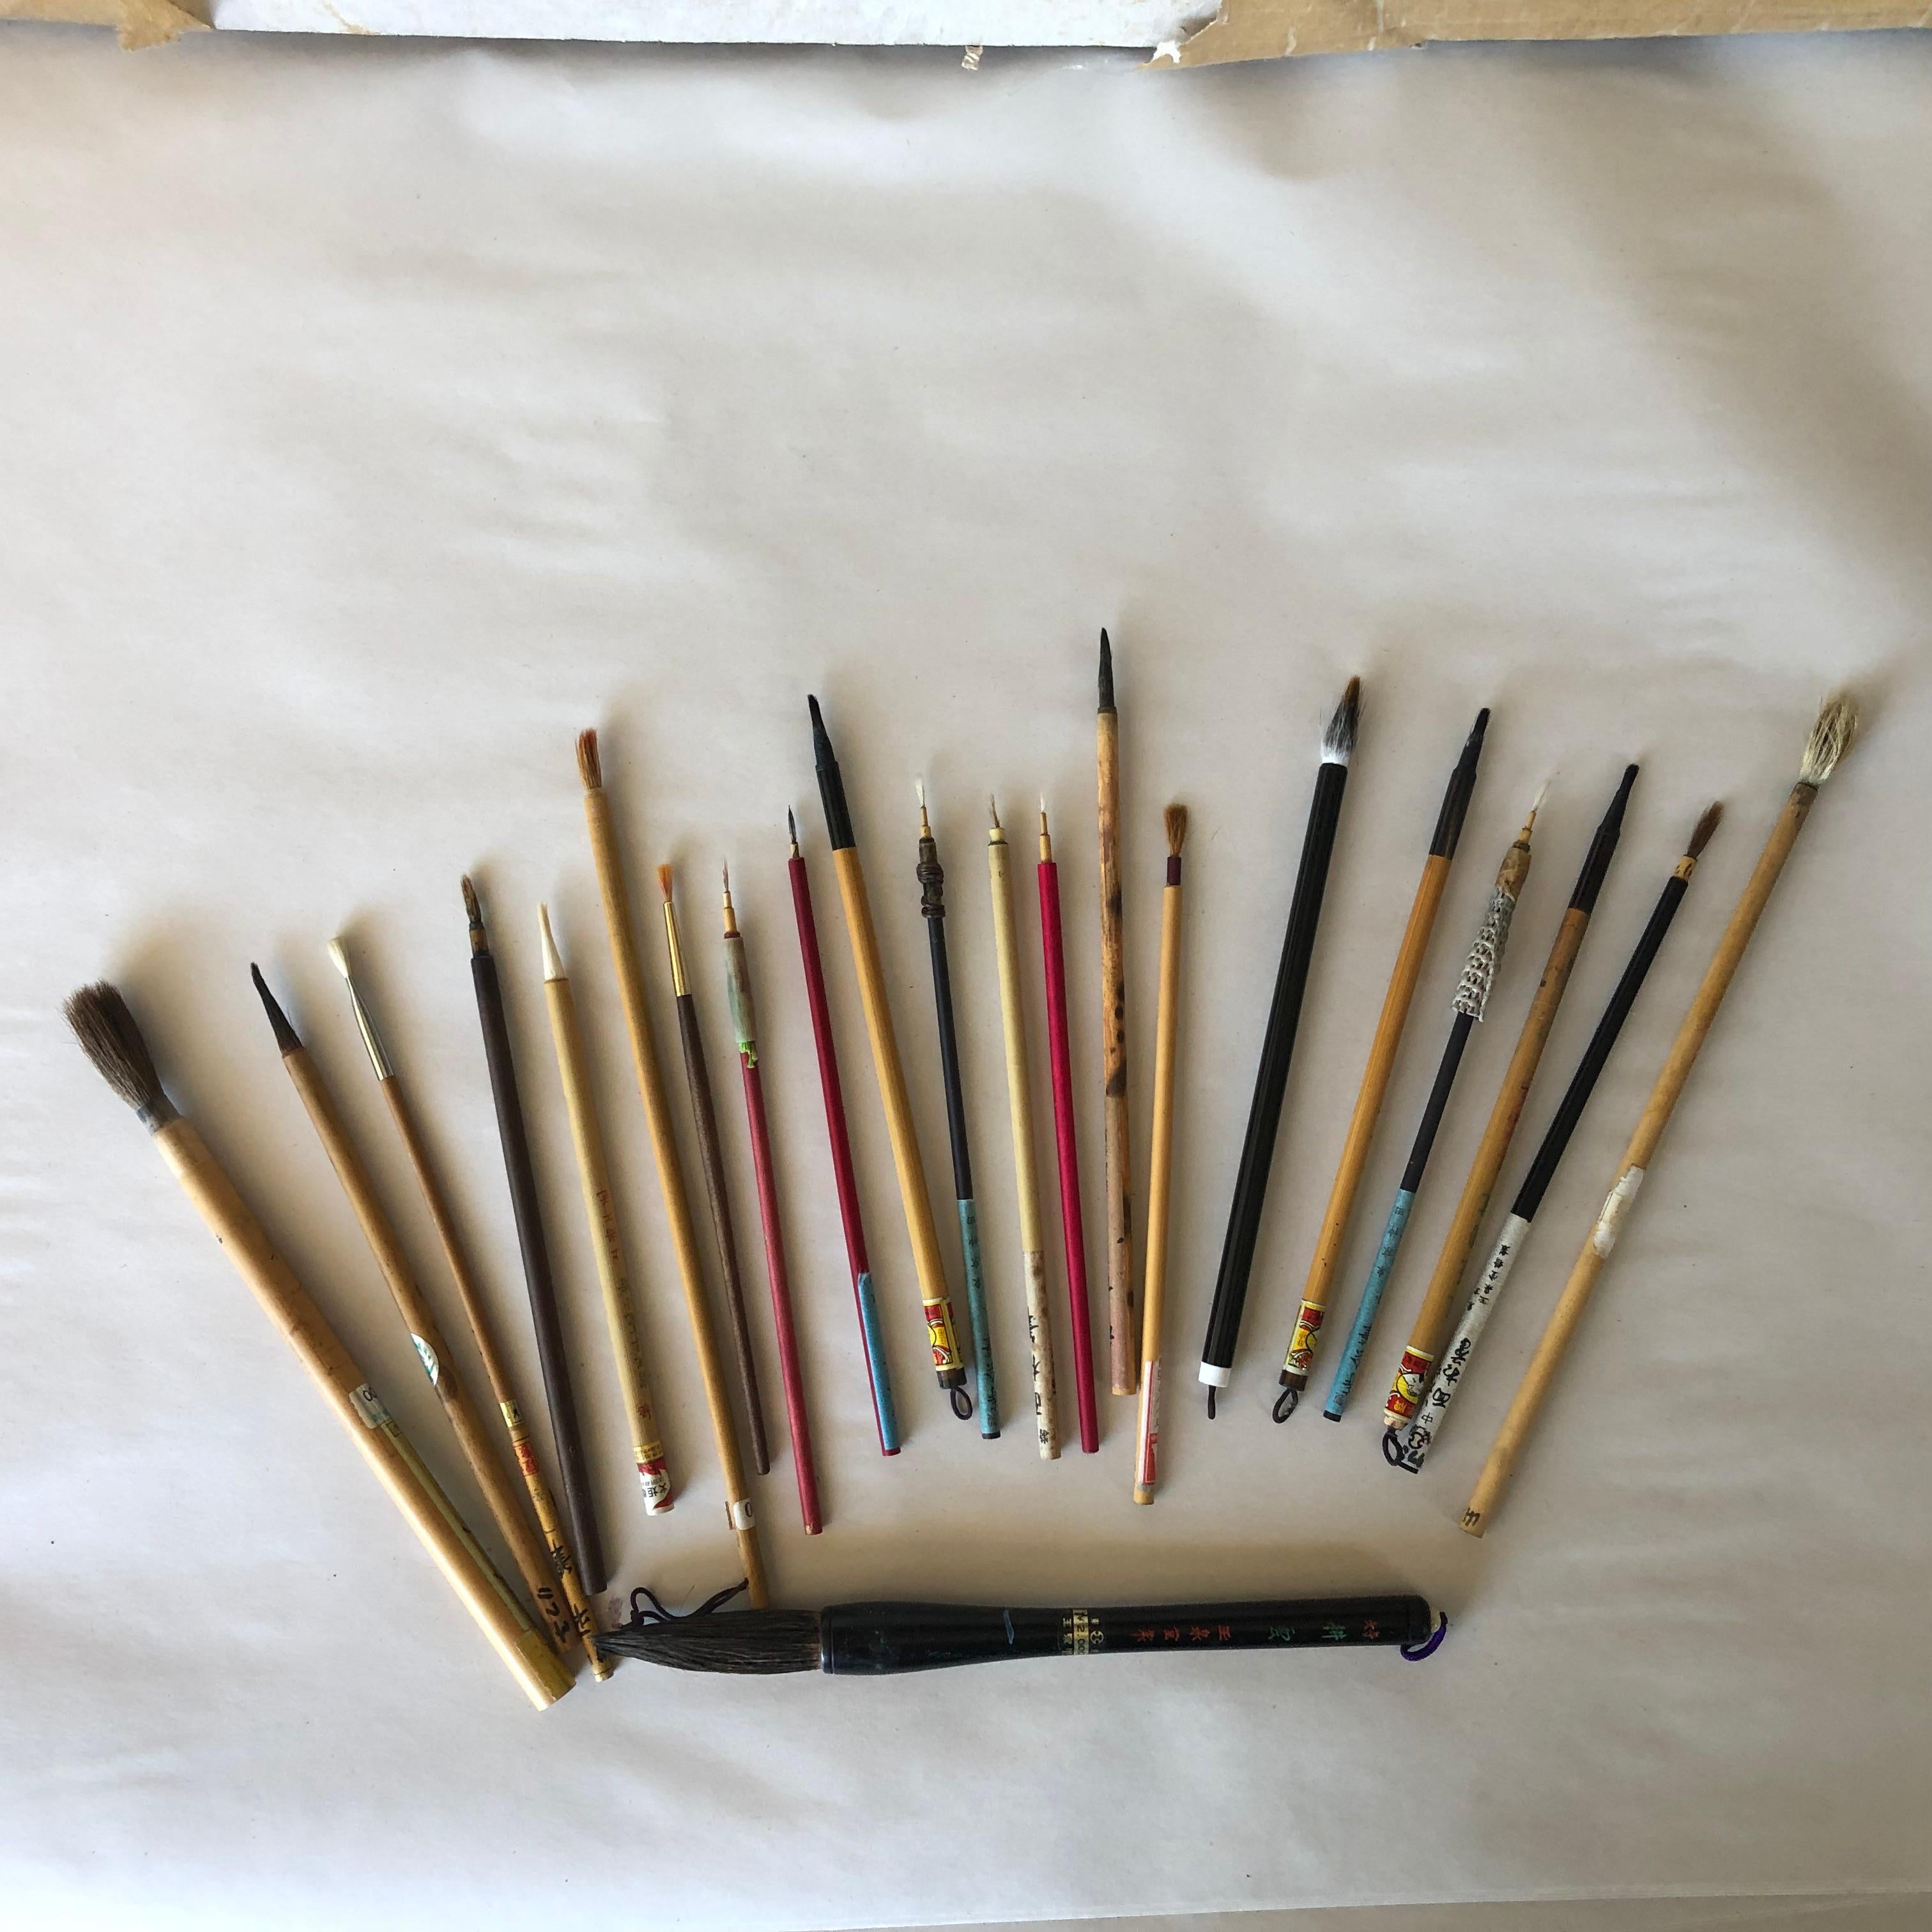 Here's a rare find from a collector we visited in Japan. A very unusual treasure from Japan, #2 

This is a cache of old Chinese and Japanese bamboo paint and calligraphy artist brushes dating back to the 1930s. The bundle includes new and used